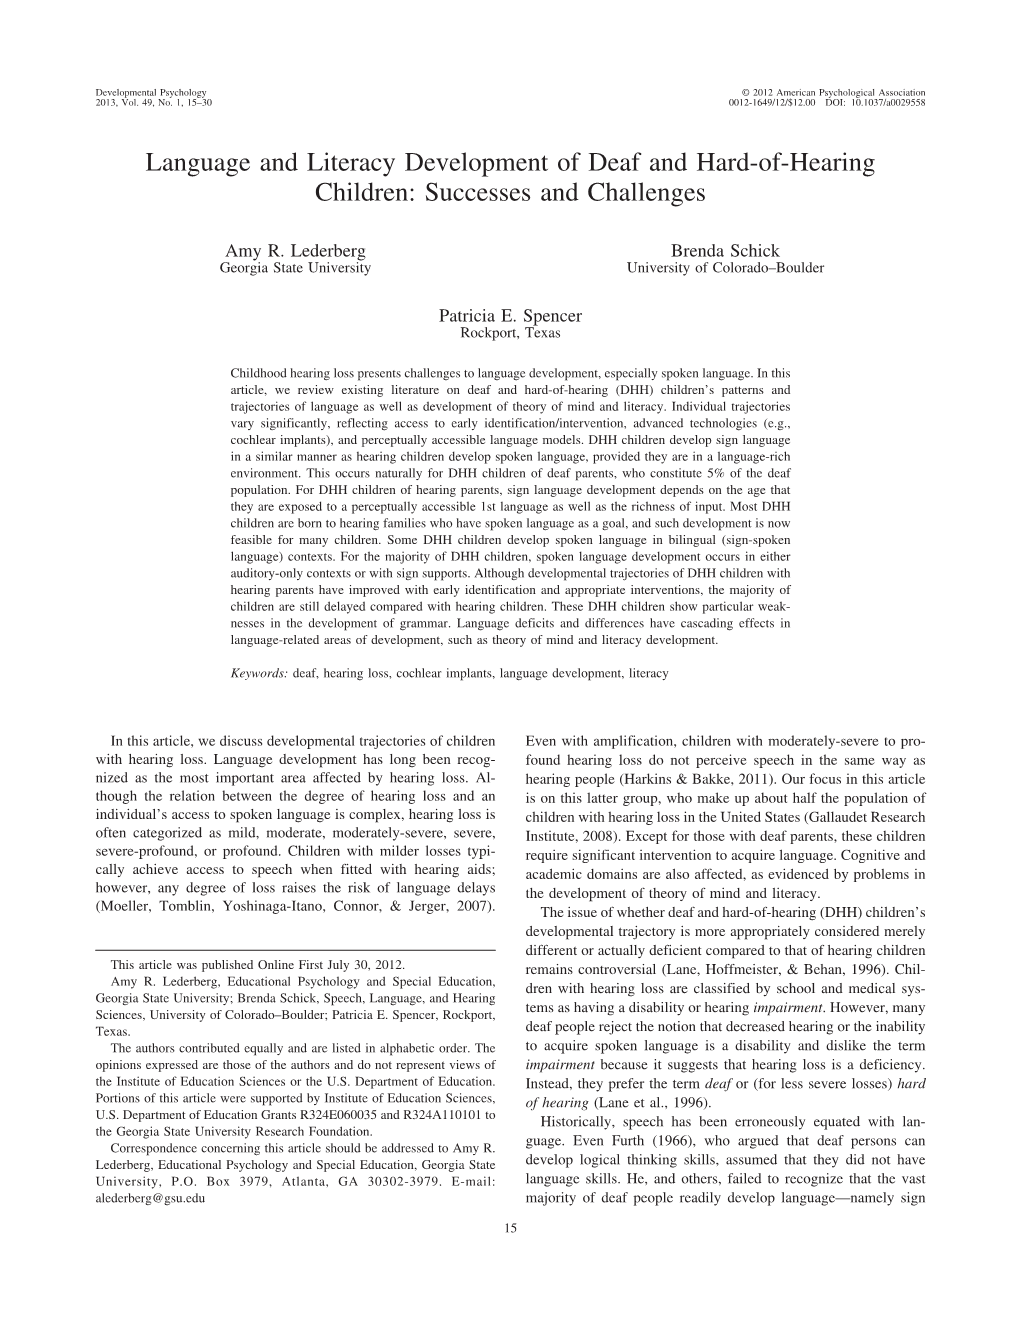 Language and Literacy Development of Deaf and Hard-Of-Hearing Children: Successes and Challenges